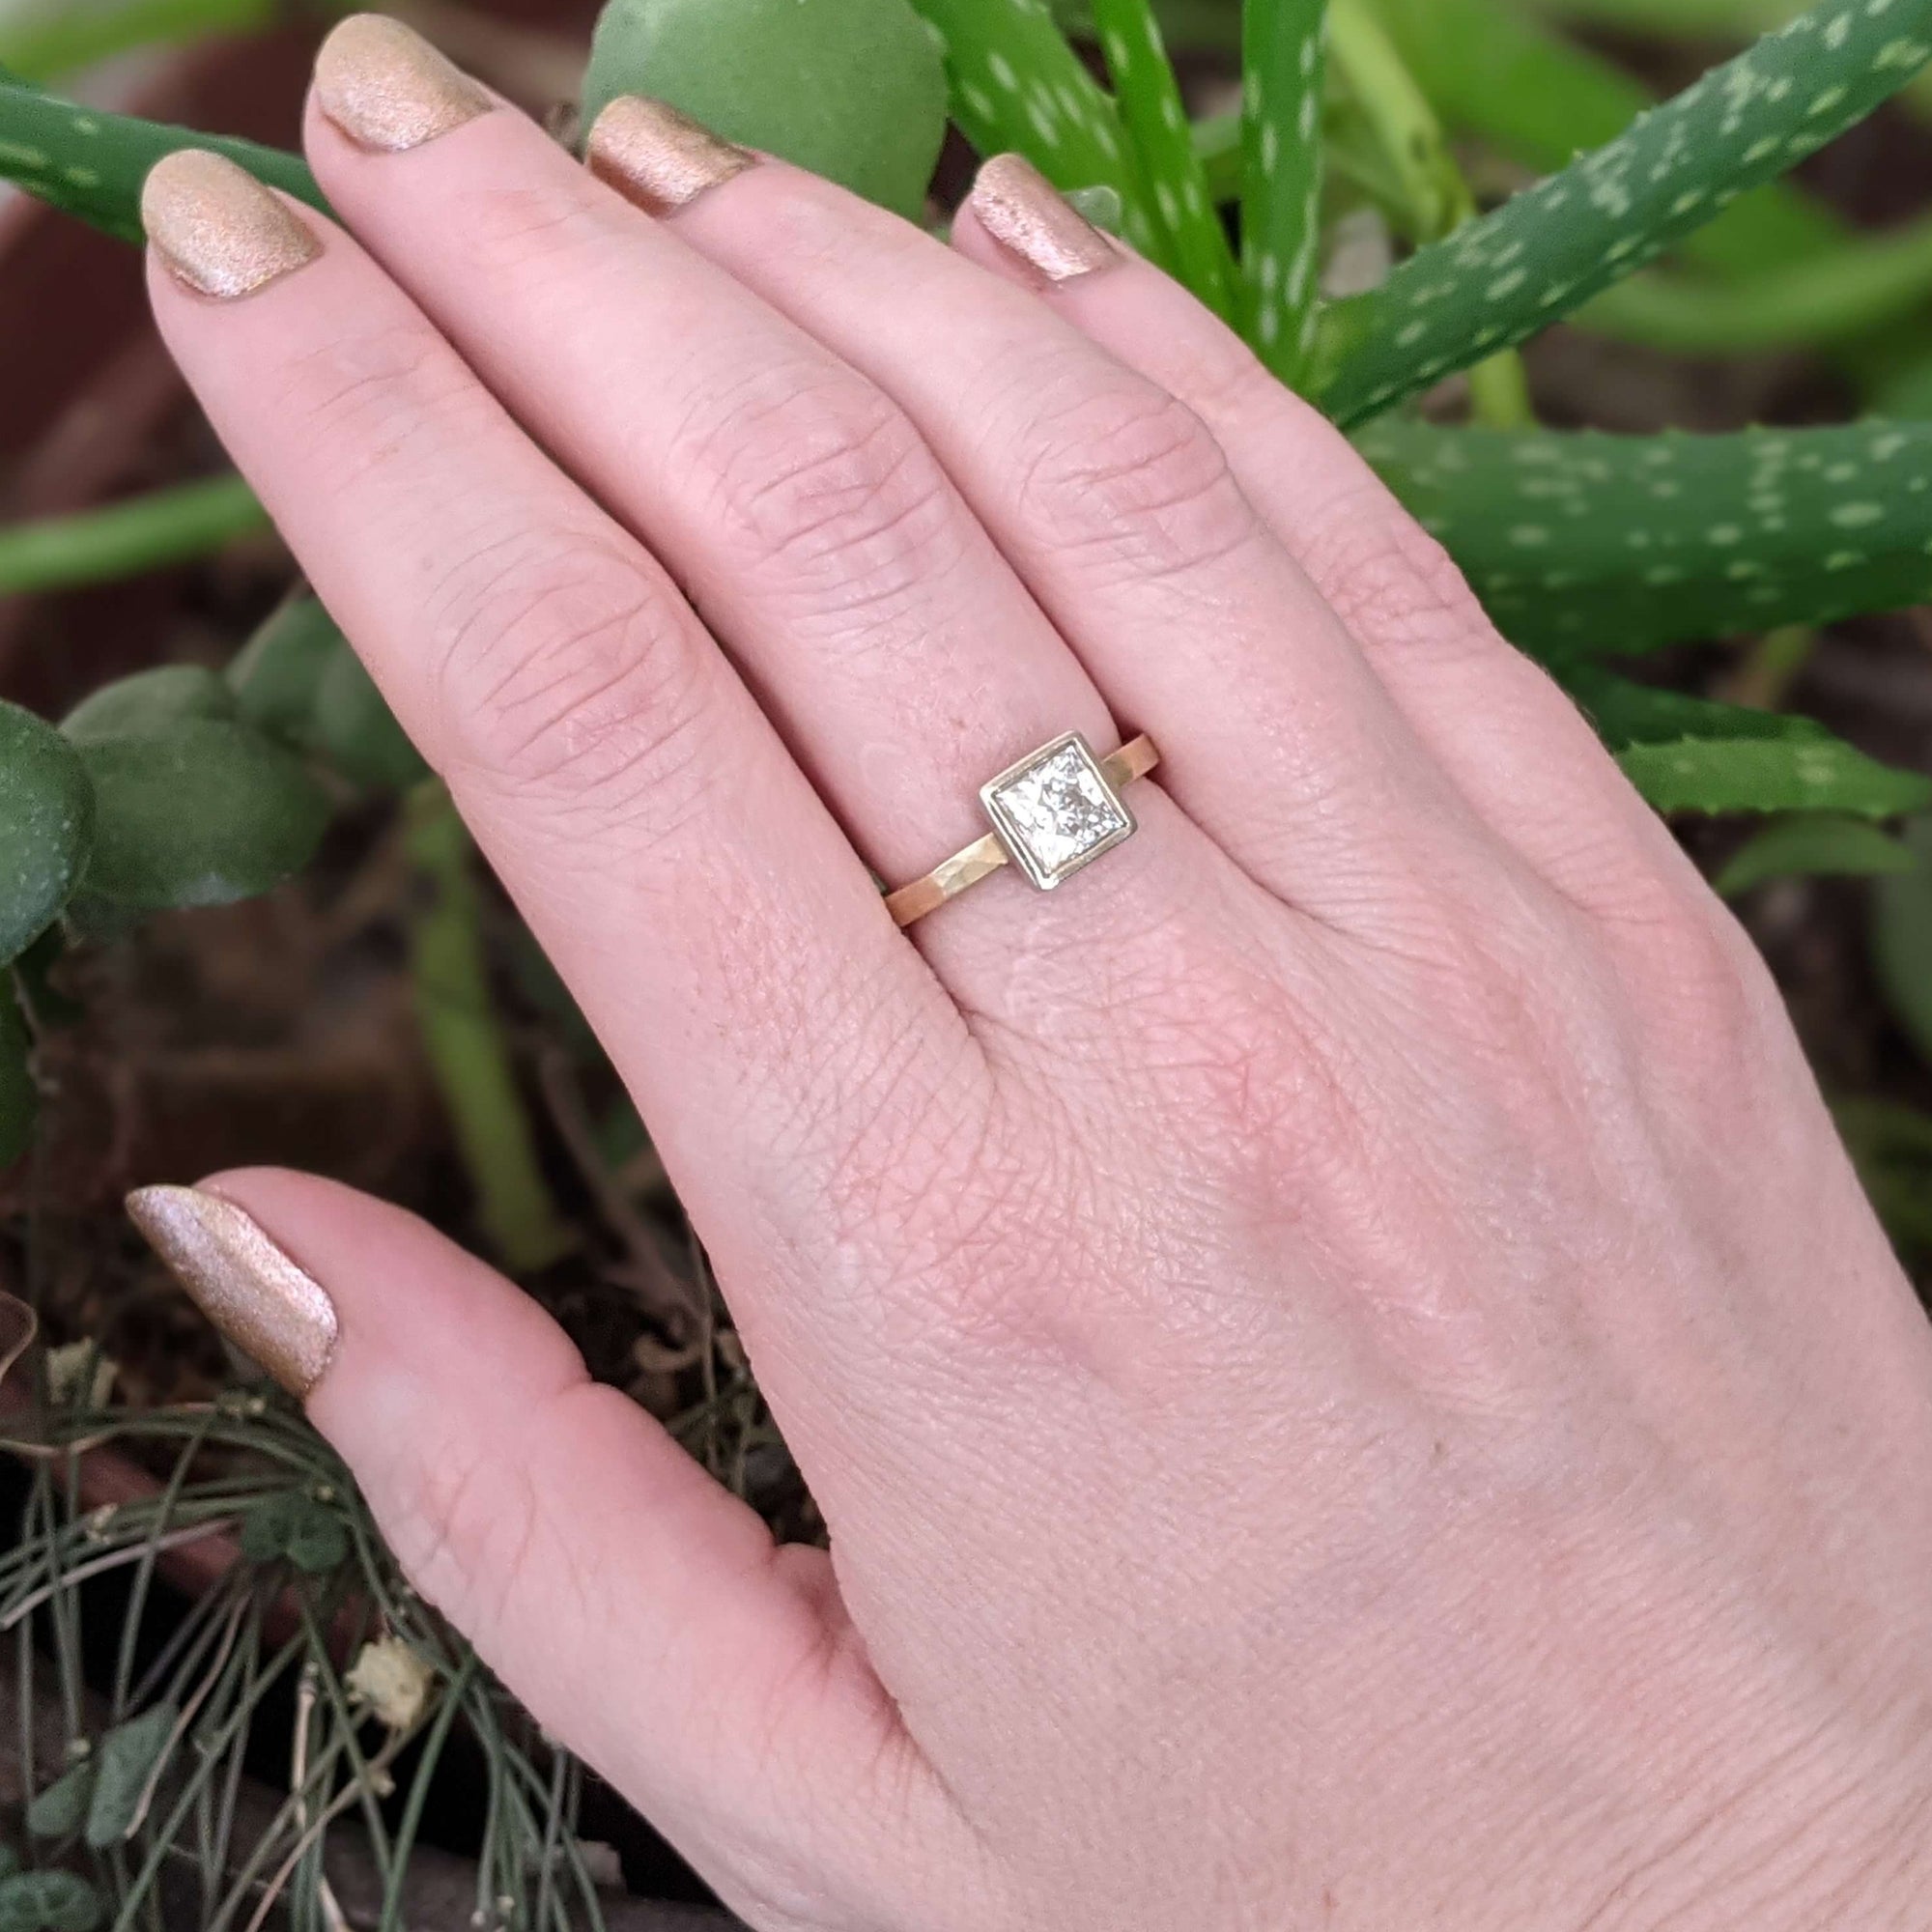 Alternative engagement ring with princess cut Moissanite in white and yellow gold. Handmade by EC Design Jewelry in Minneapolis, MN using recycled metal and conflict-free stone.